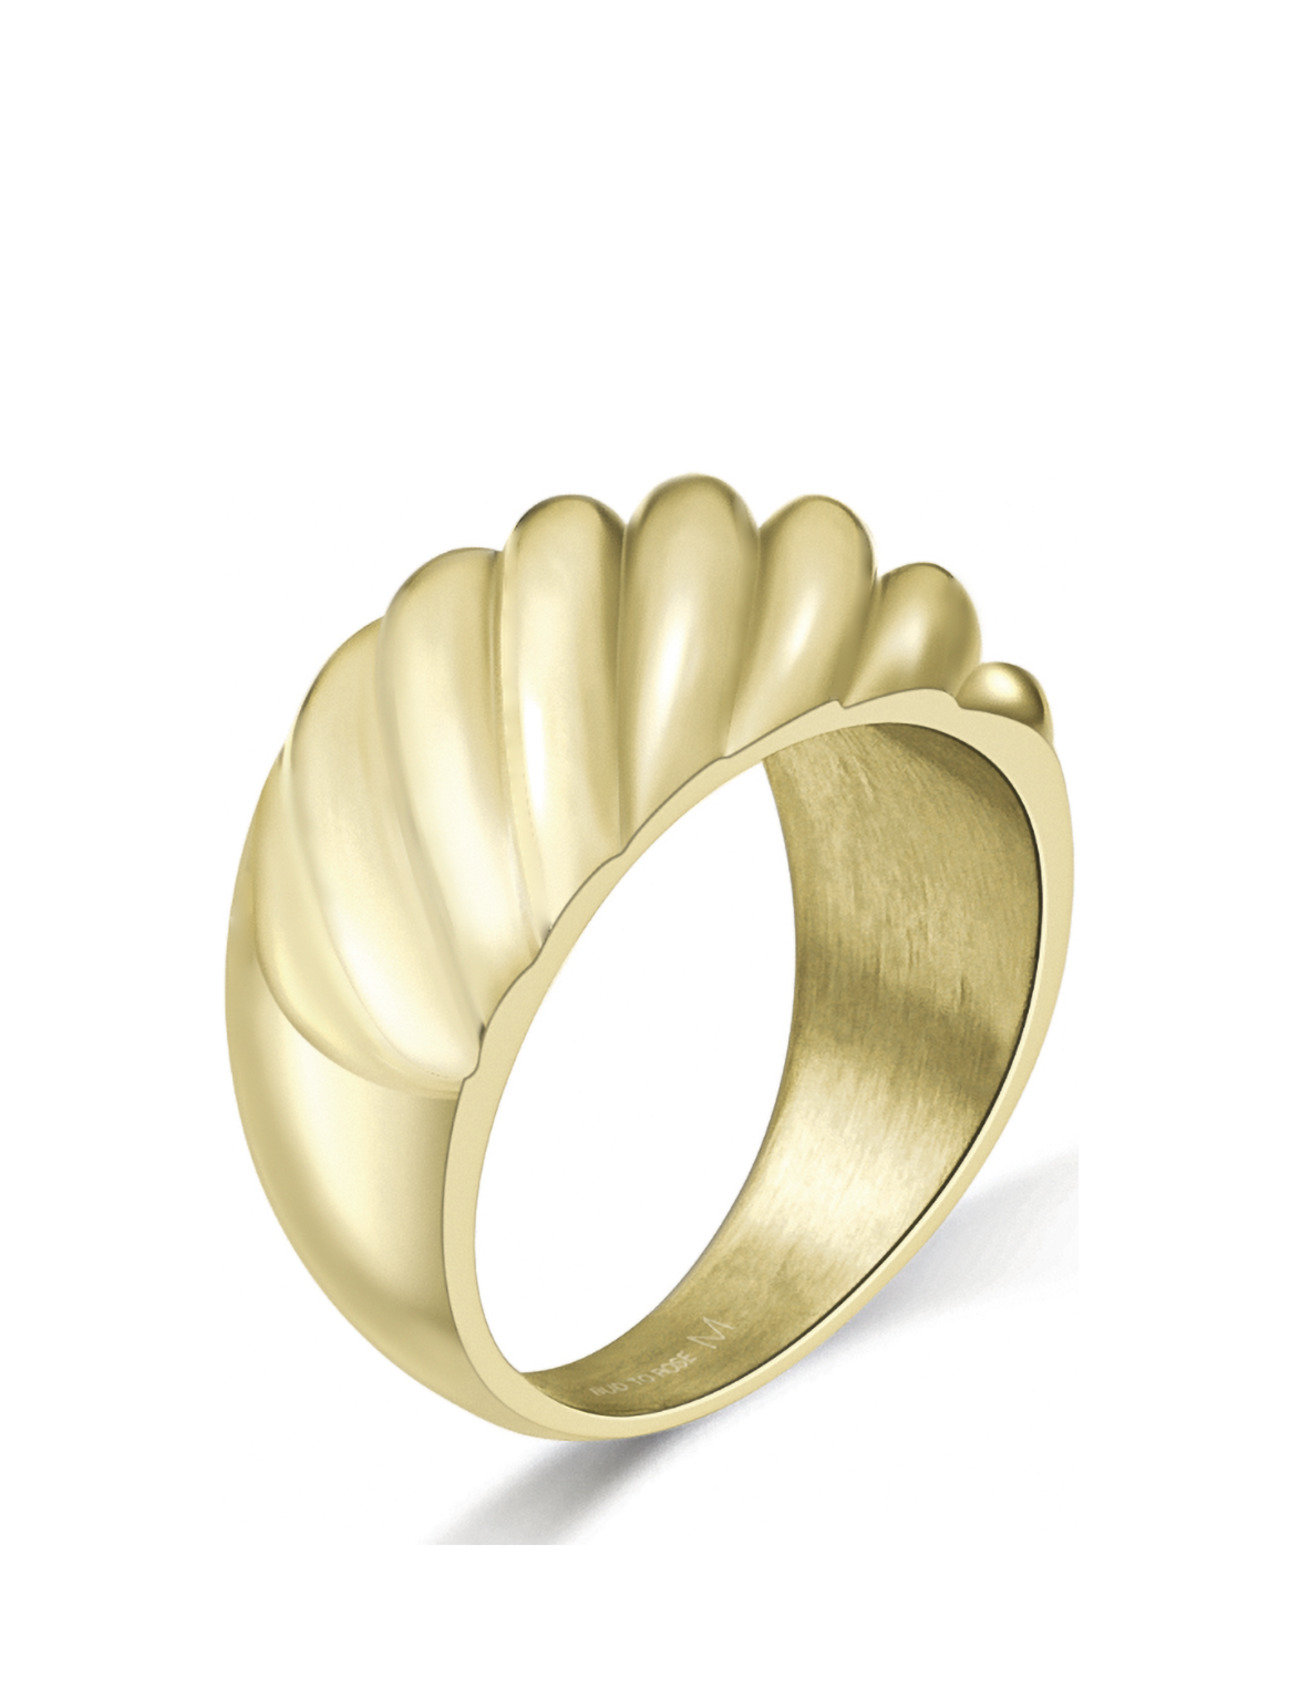 Bedrift Hovedløse bue Guld Bud to rose Sway Bold Ring Gold Ring Smykker Guld Bud To Rose ringe  for dame - Pashion.dk